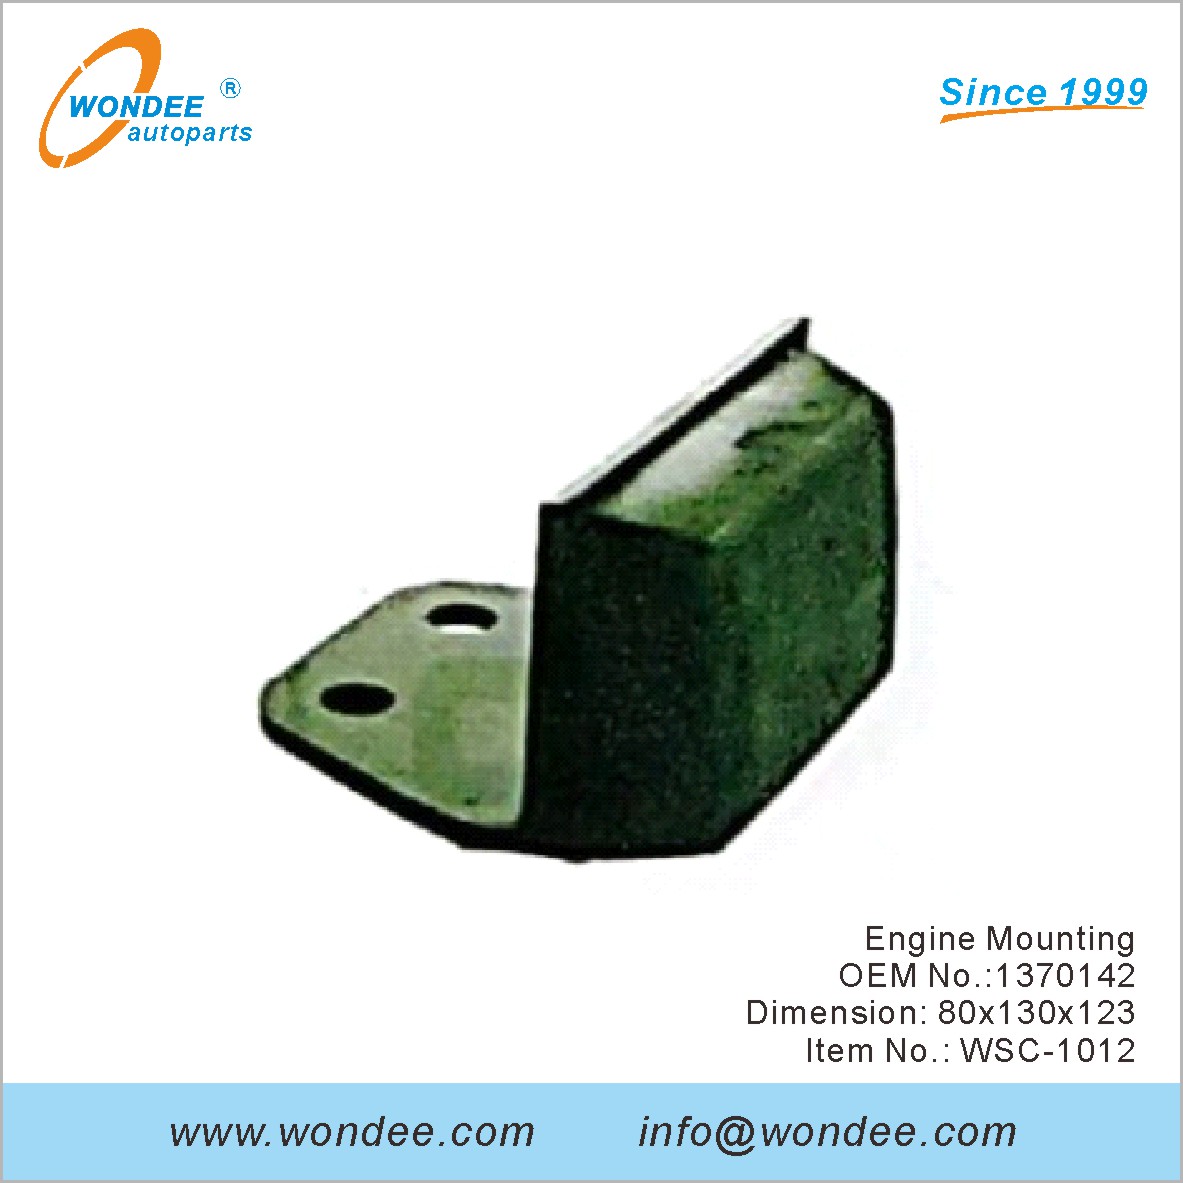 Engine Mounting OEM 1370142 from WONDEE